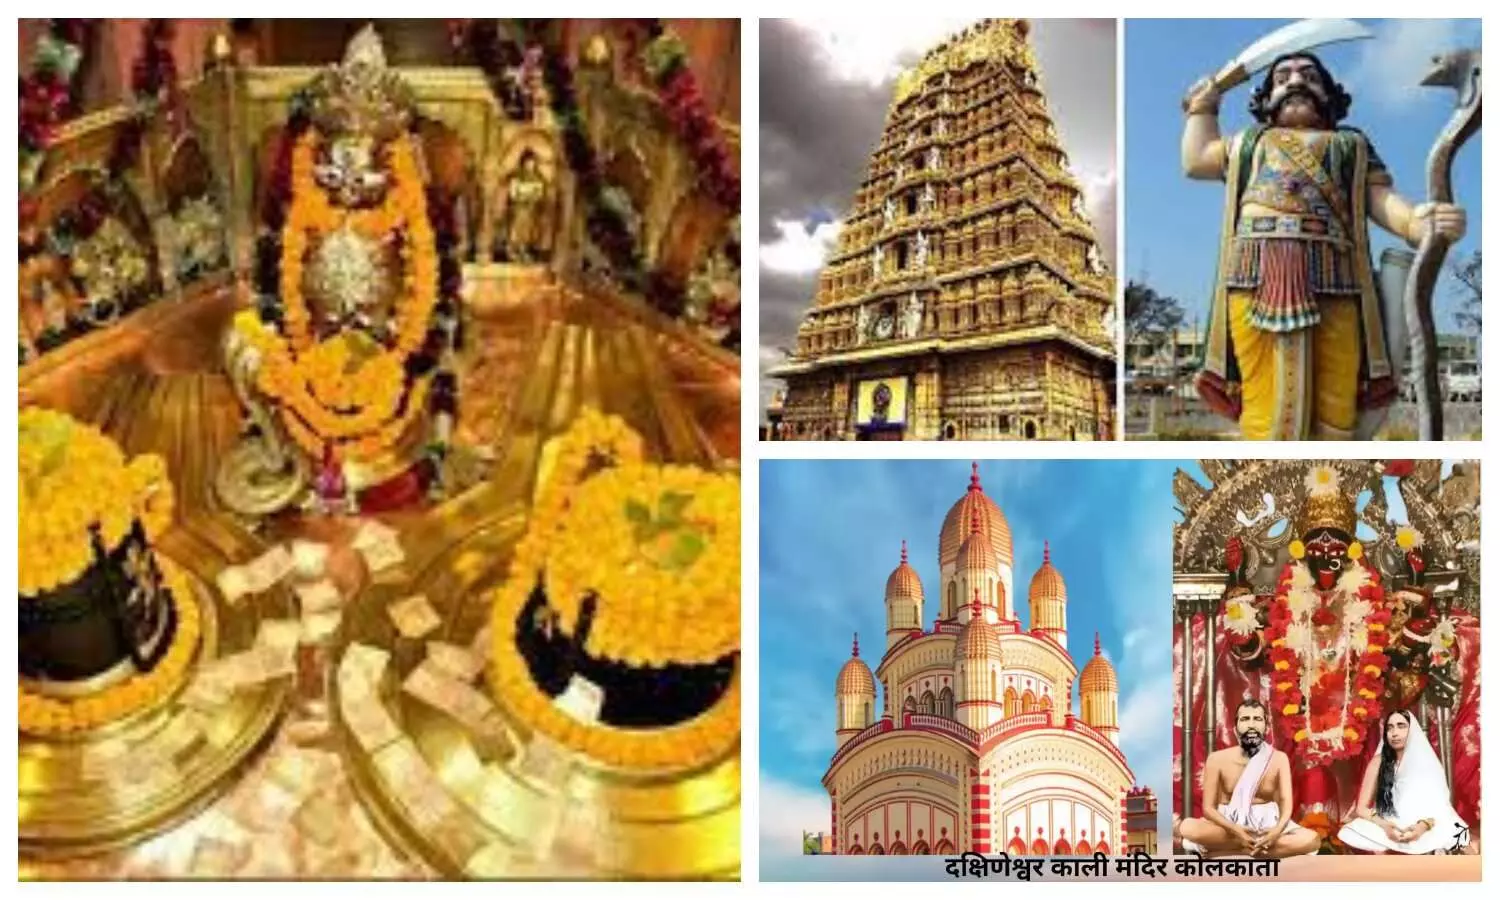 Famous Durga Temples of India